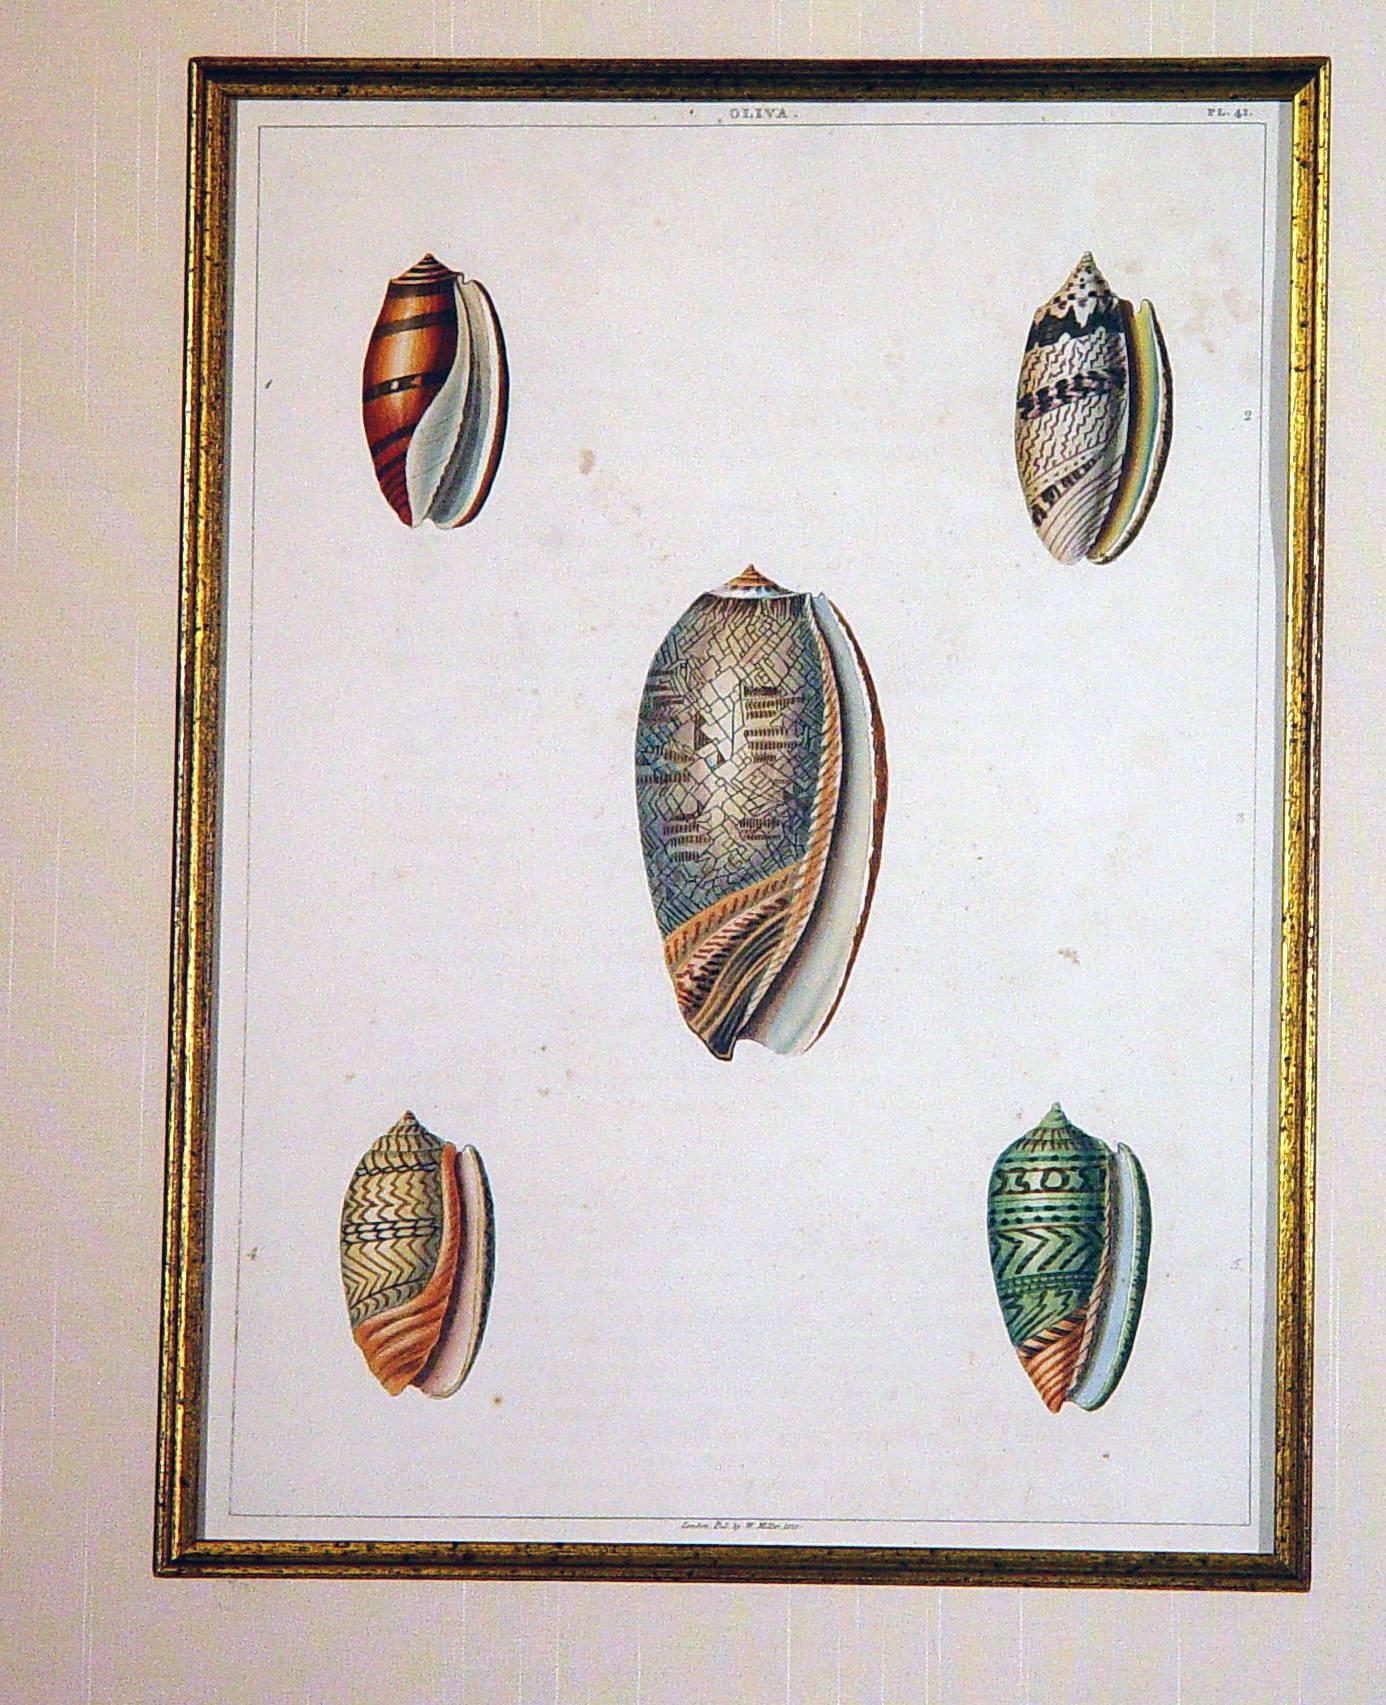 Paper Sea Shells Large Engraving George Perry from the Natural History of Shells